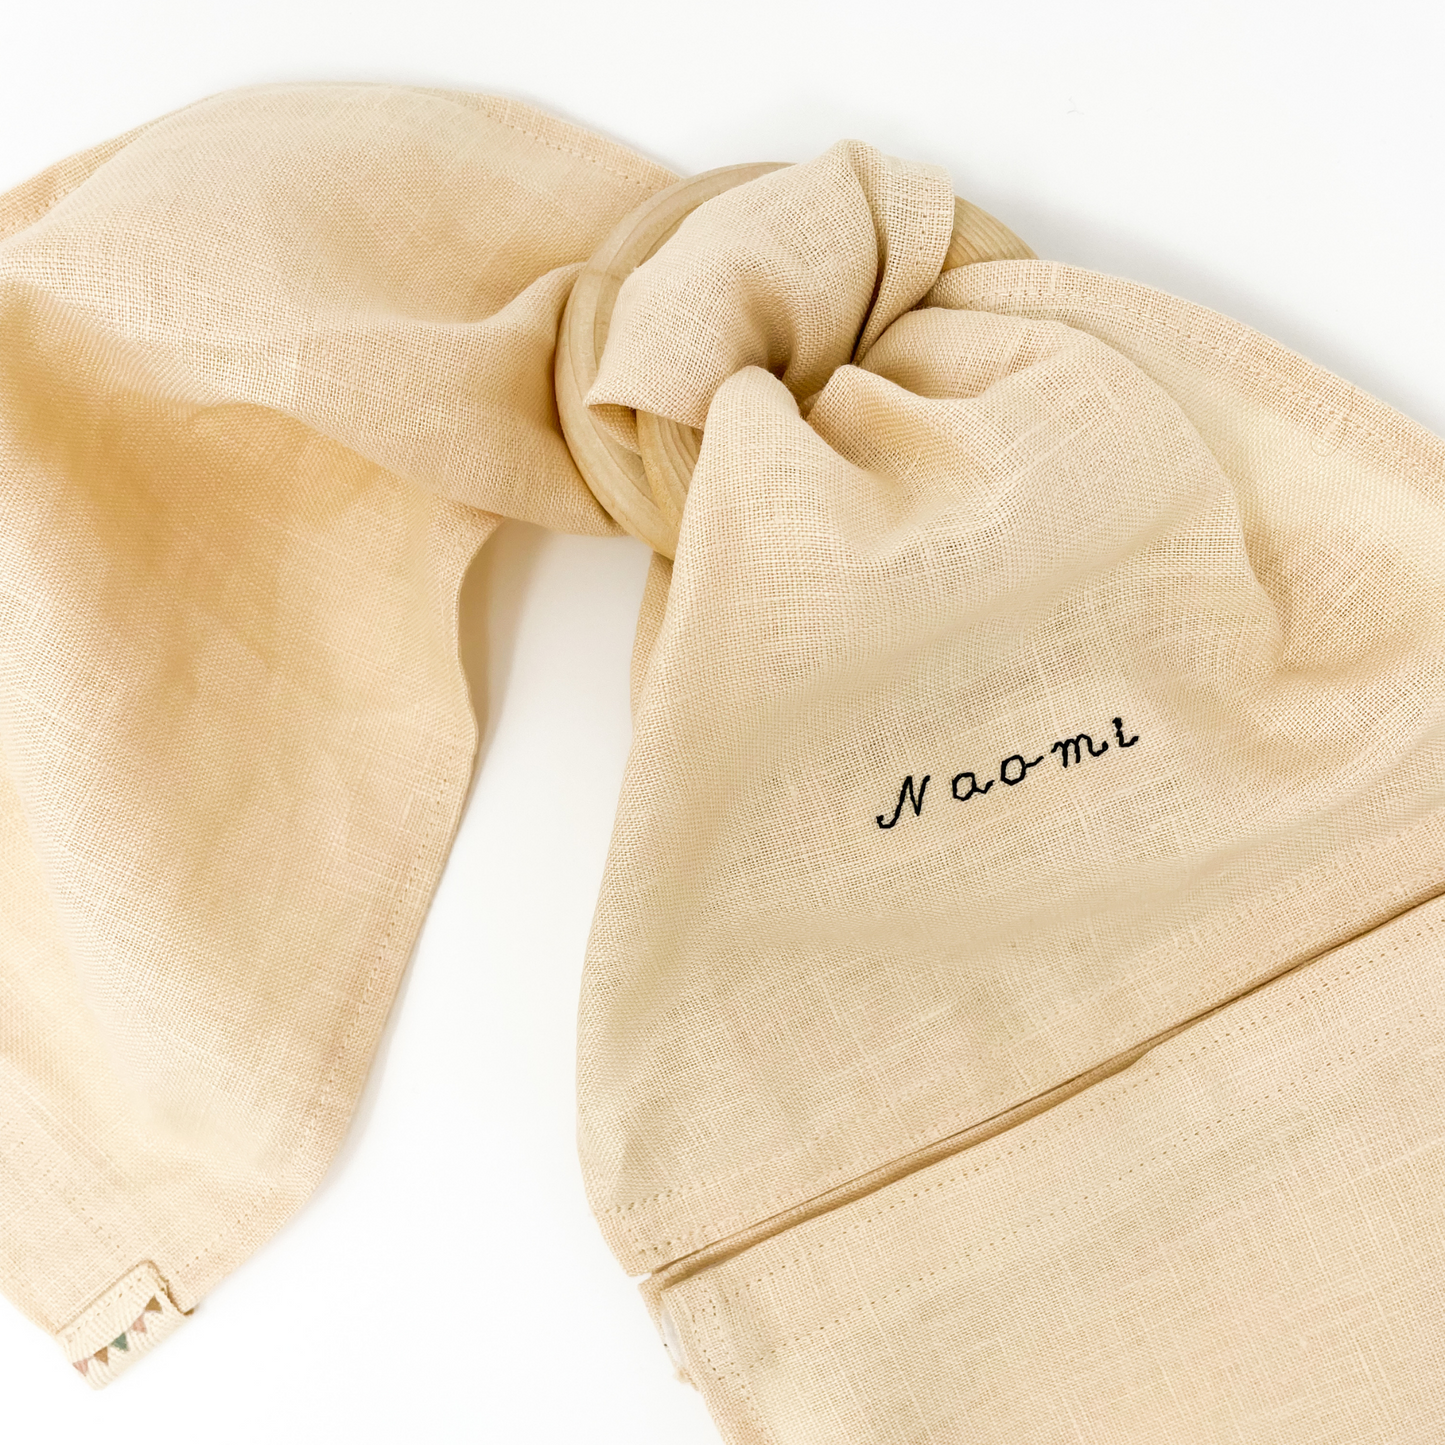 Linen Sling Carrier for Dolls with Personalization